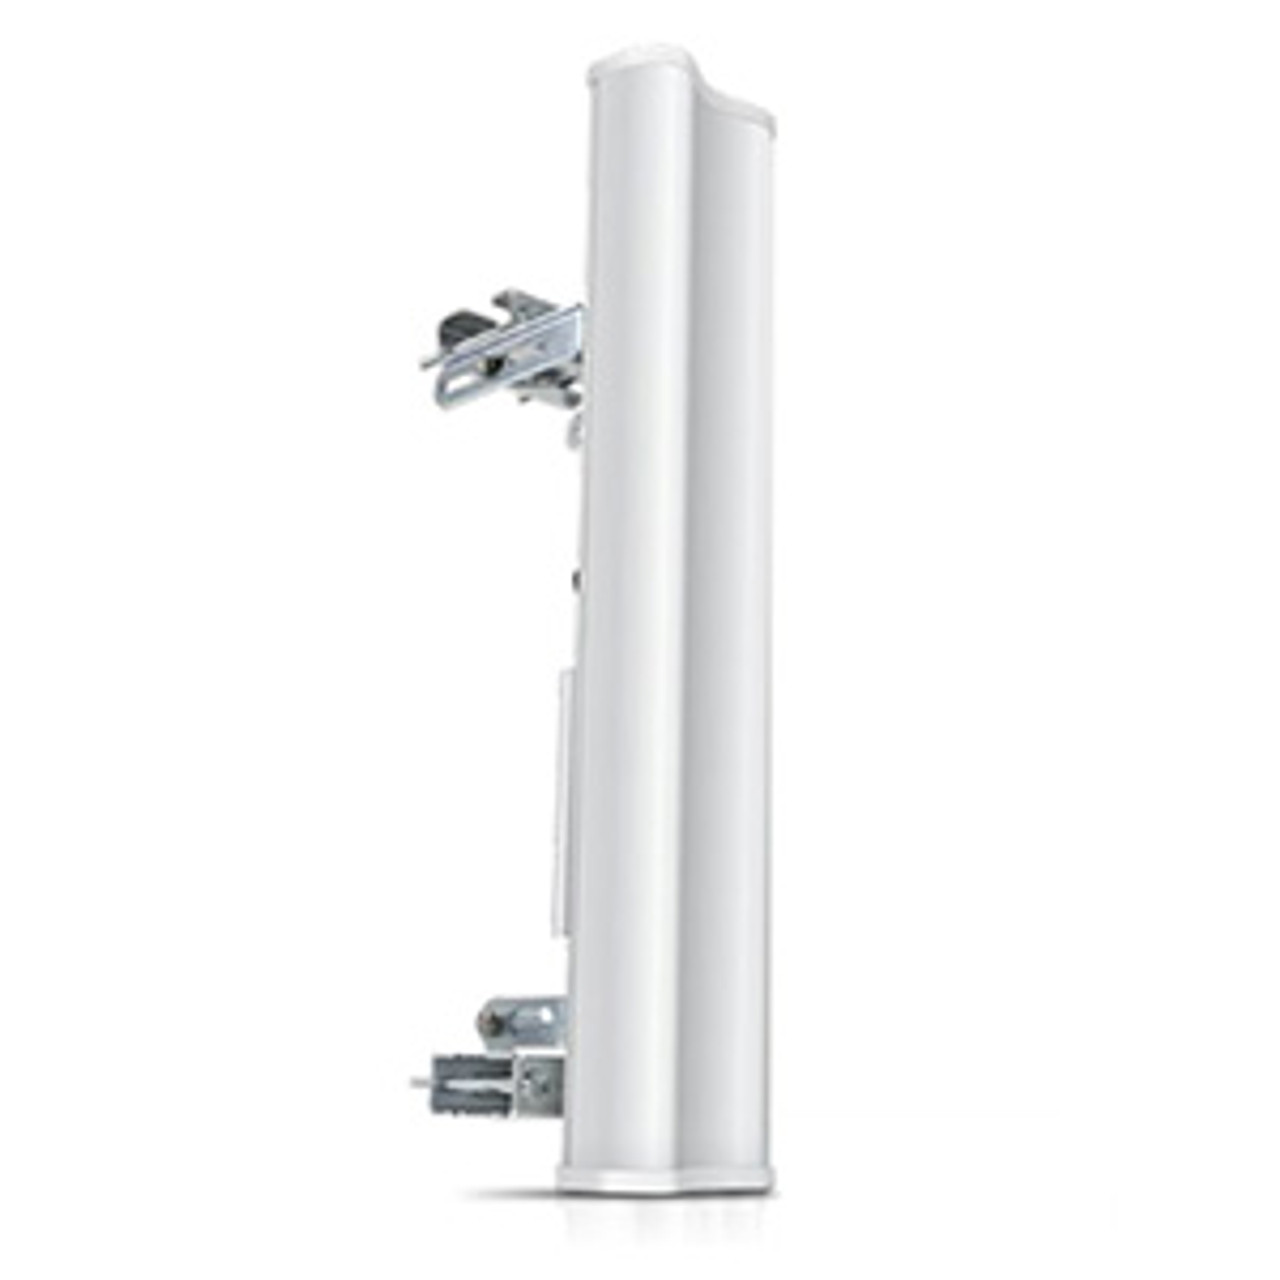 medias posterior trampa Ubiquiti AirMax-5G19-120 Airmax 120 Degree 5 Ghz MIMO 19 dbi w/ cables, For  RocketM5